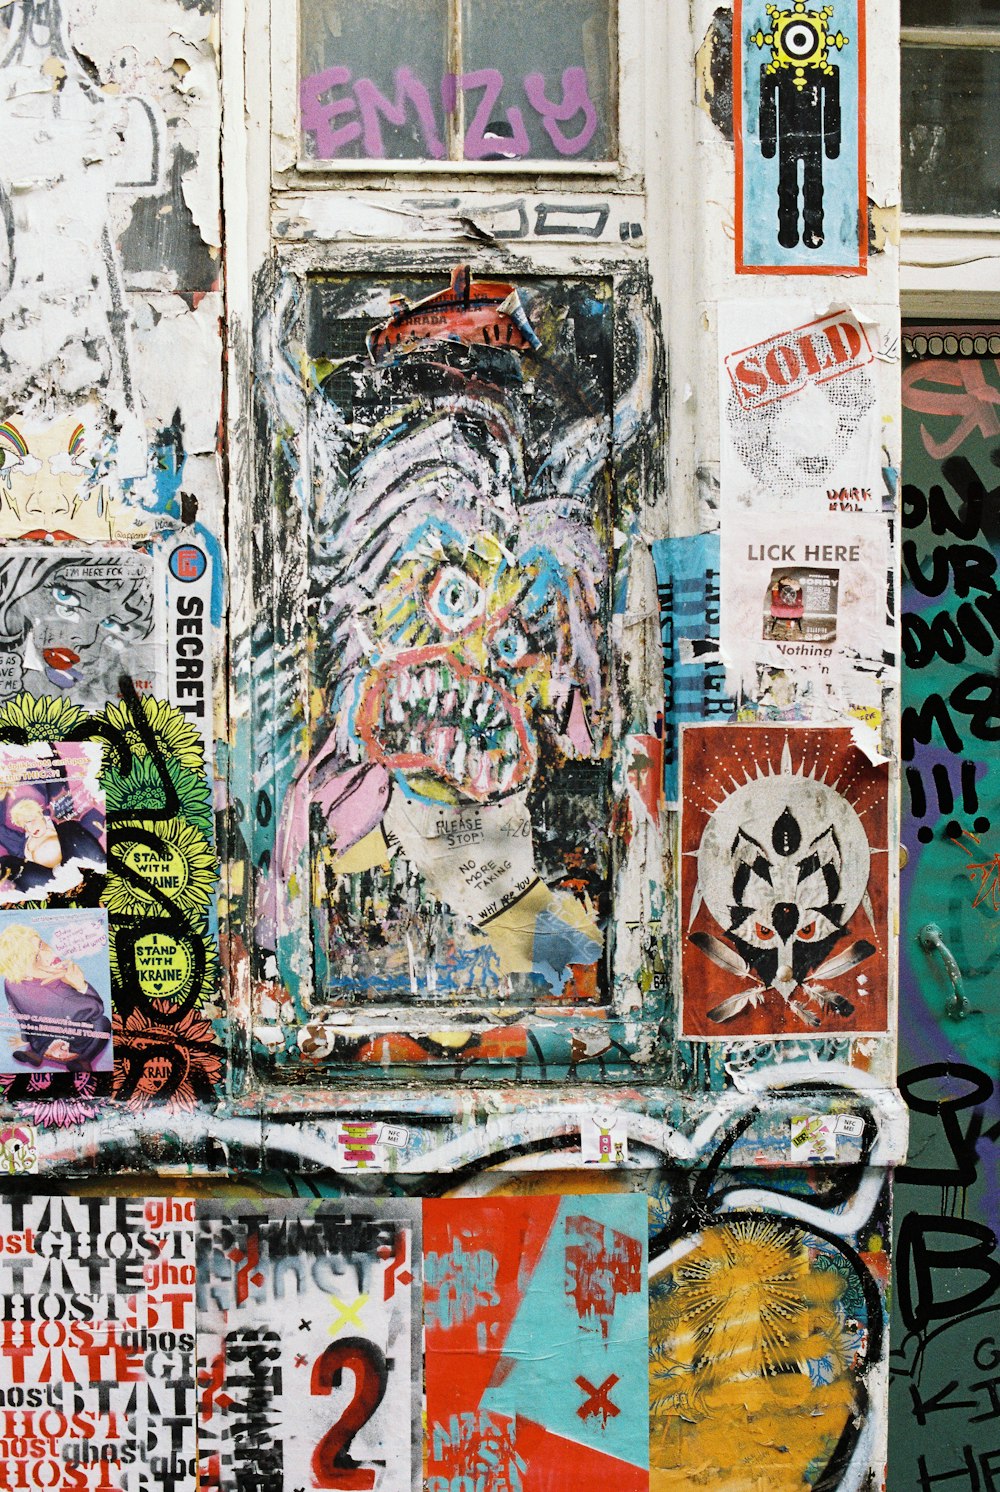 a wall covered in graffiti and stickers